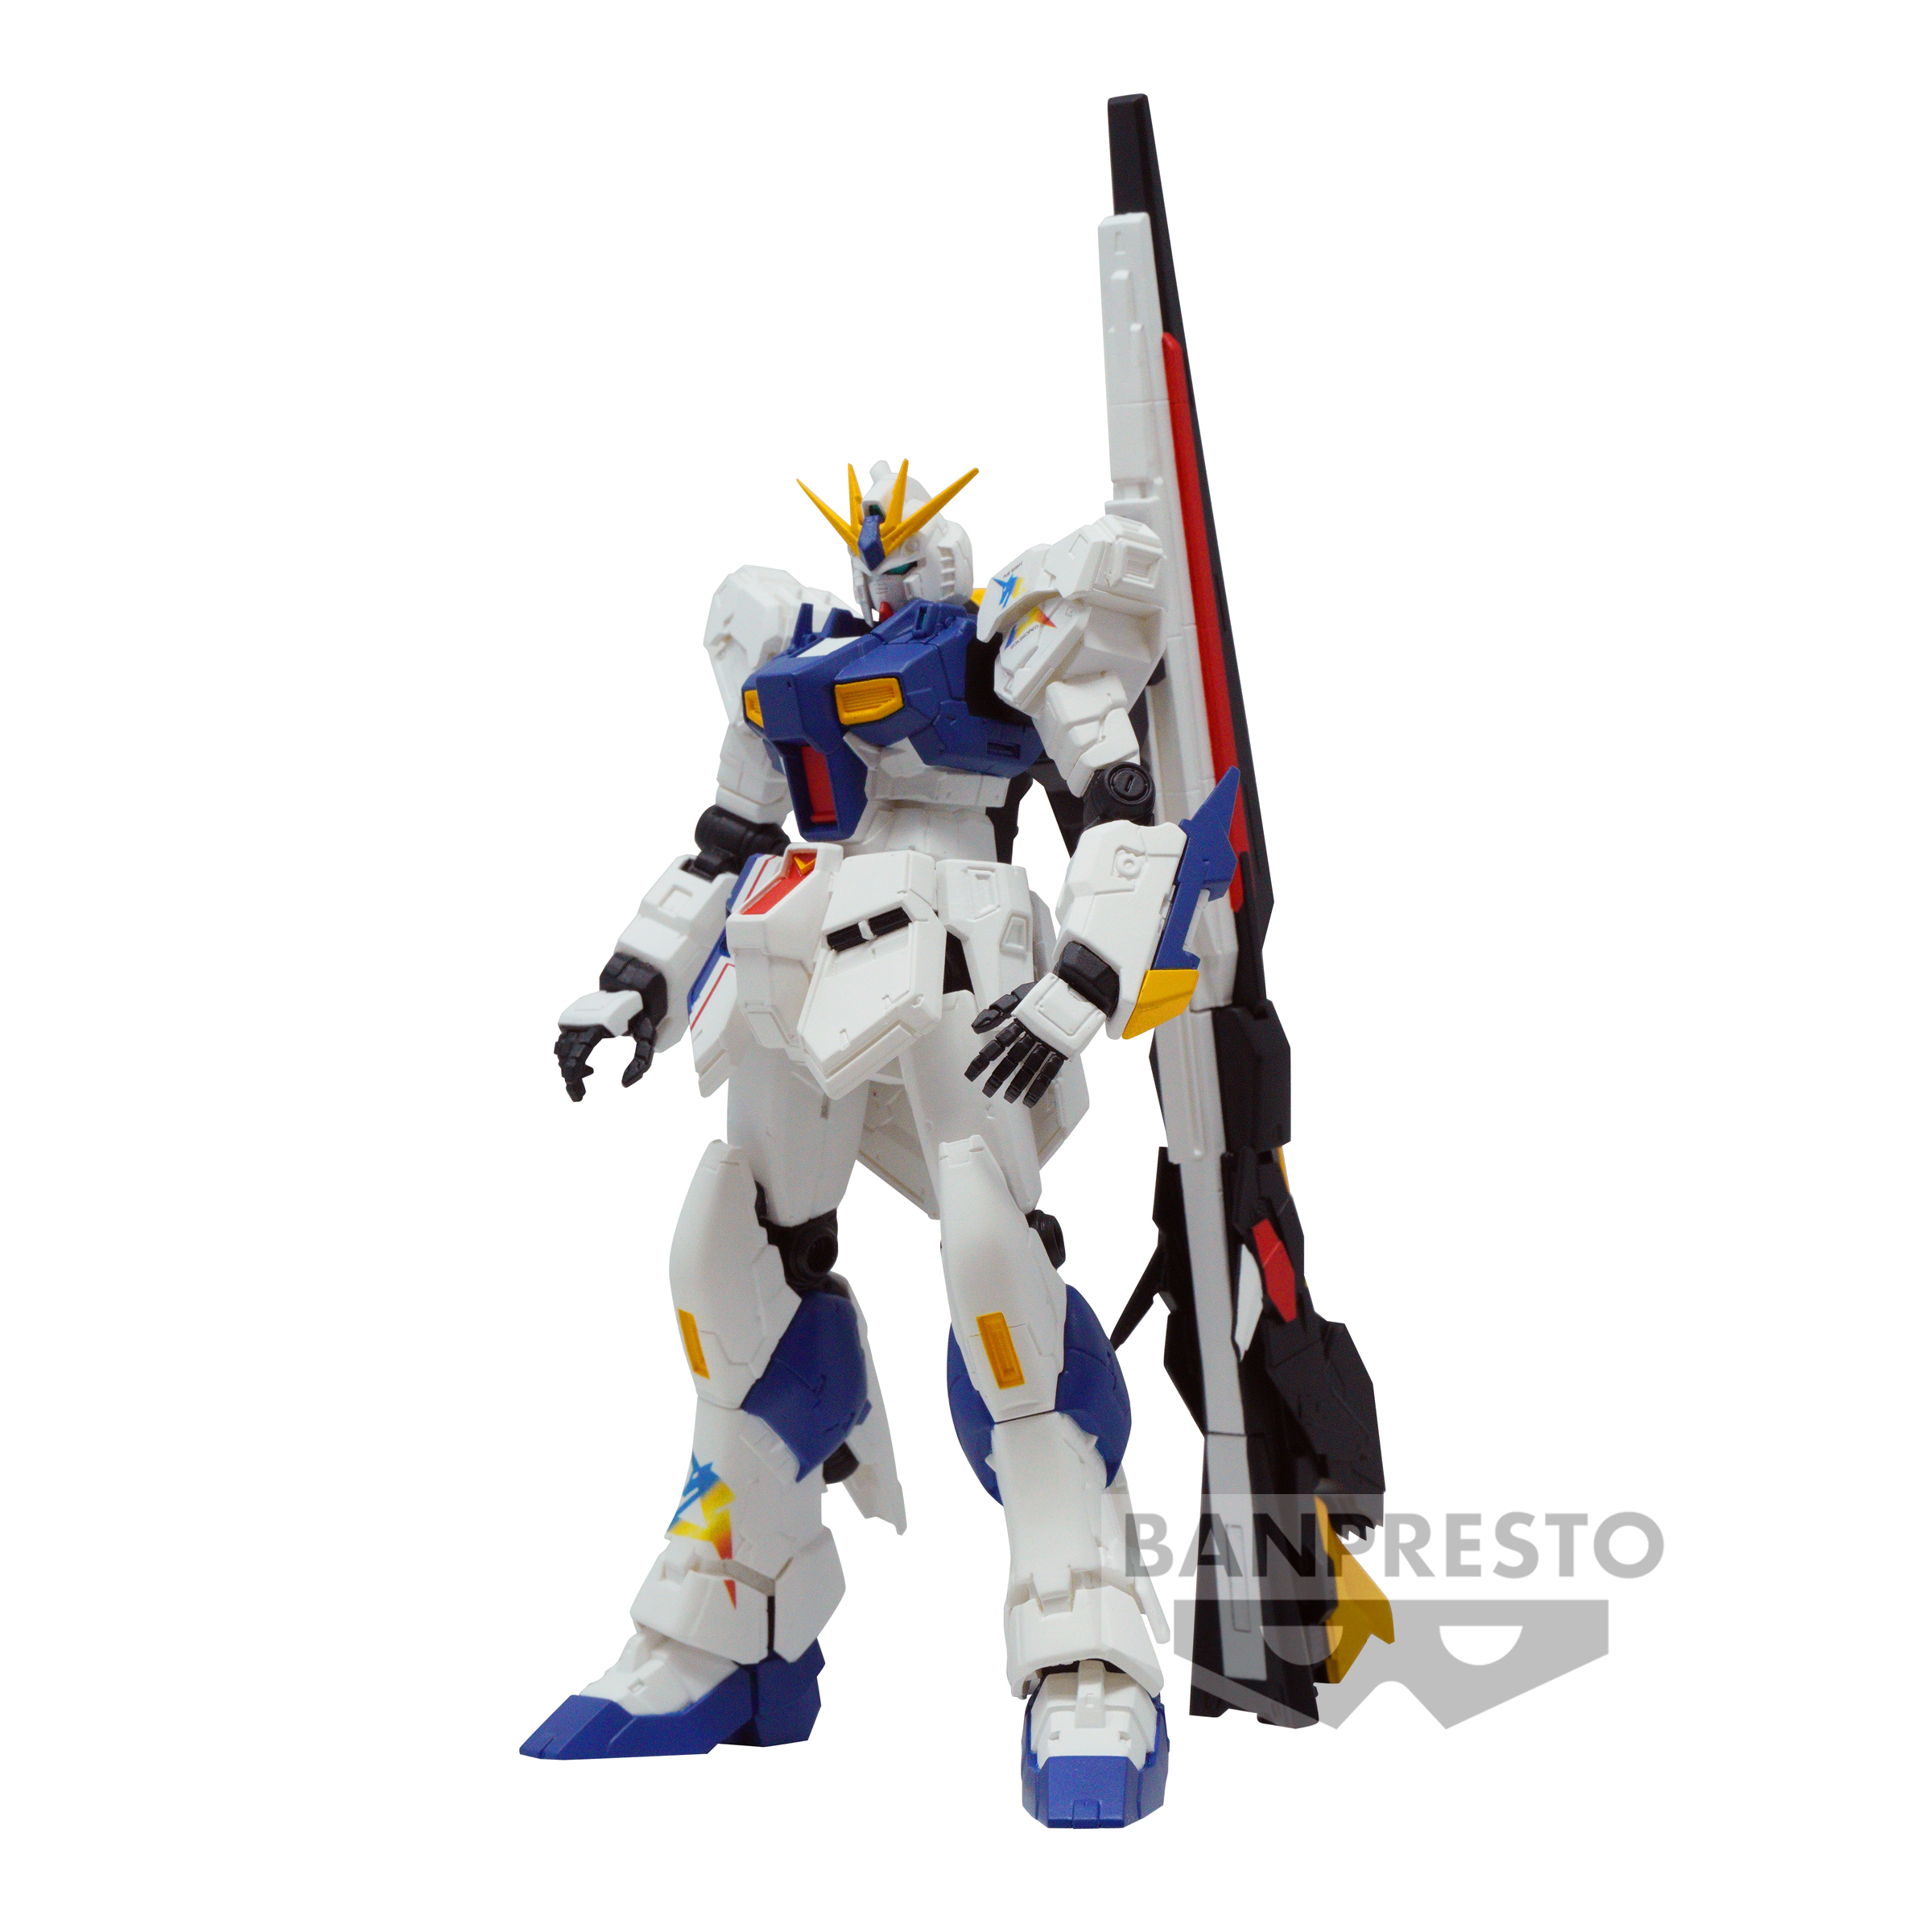 PREORDER - WAVE 114 - Mobile Suit Gundam Char's Counterattack - The Life Sized Gundam Statue RX-93ff - 14cm PVC Statue